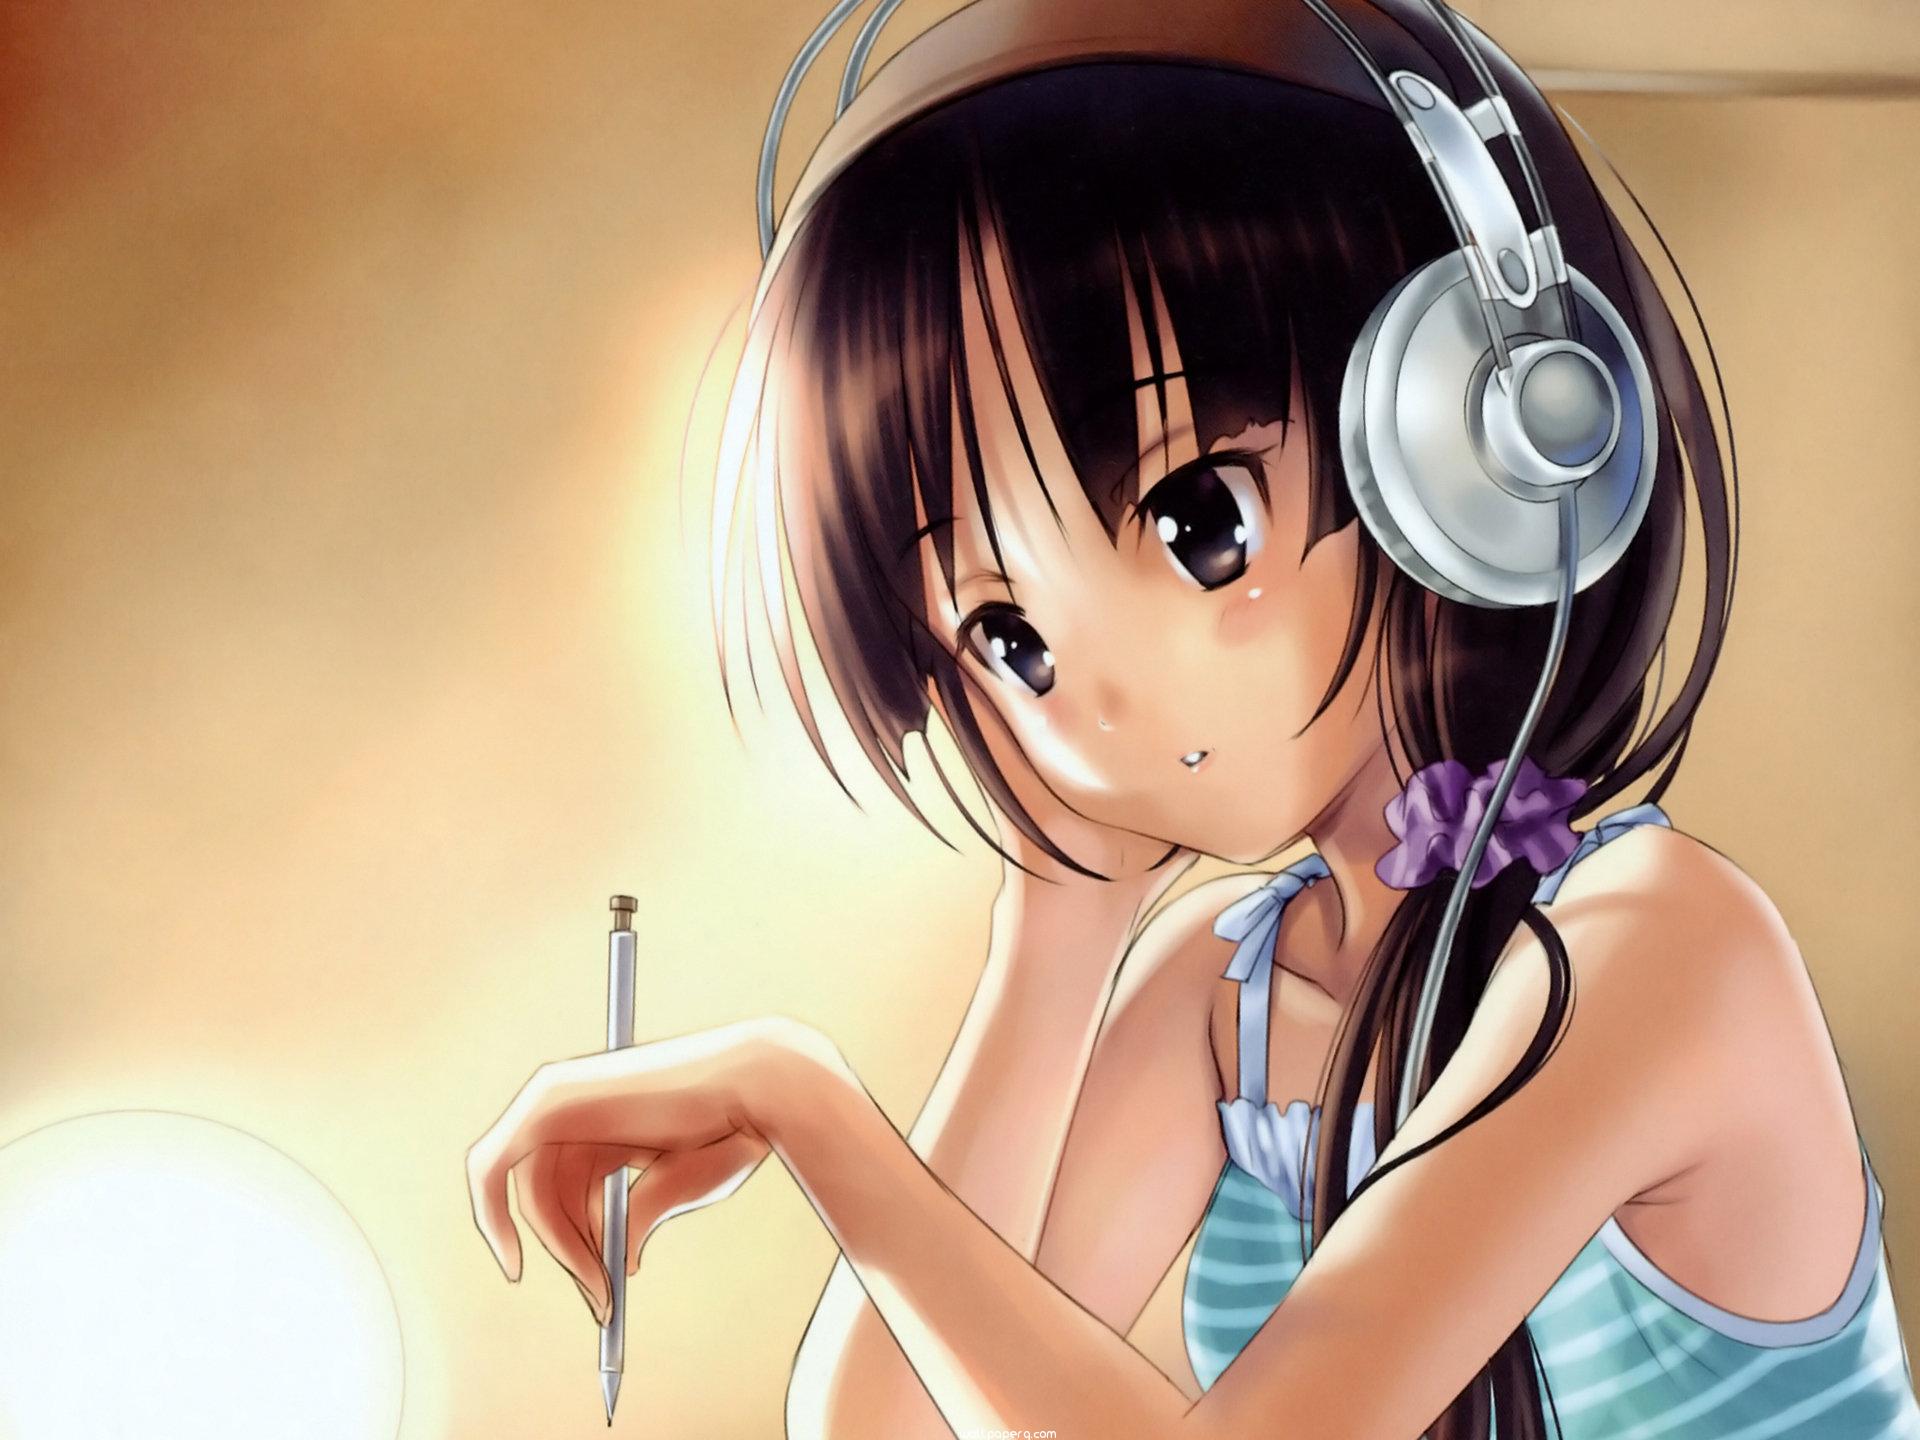 Download Anime girl listening music girl with attitude for your mobile cell phone